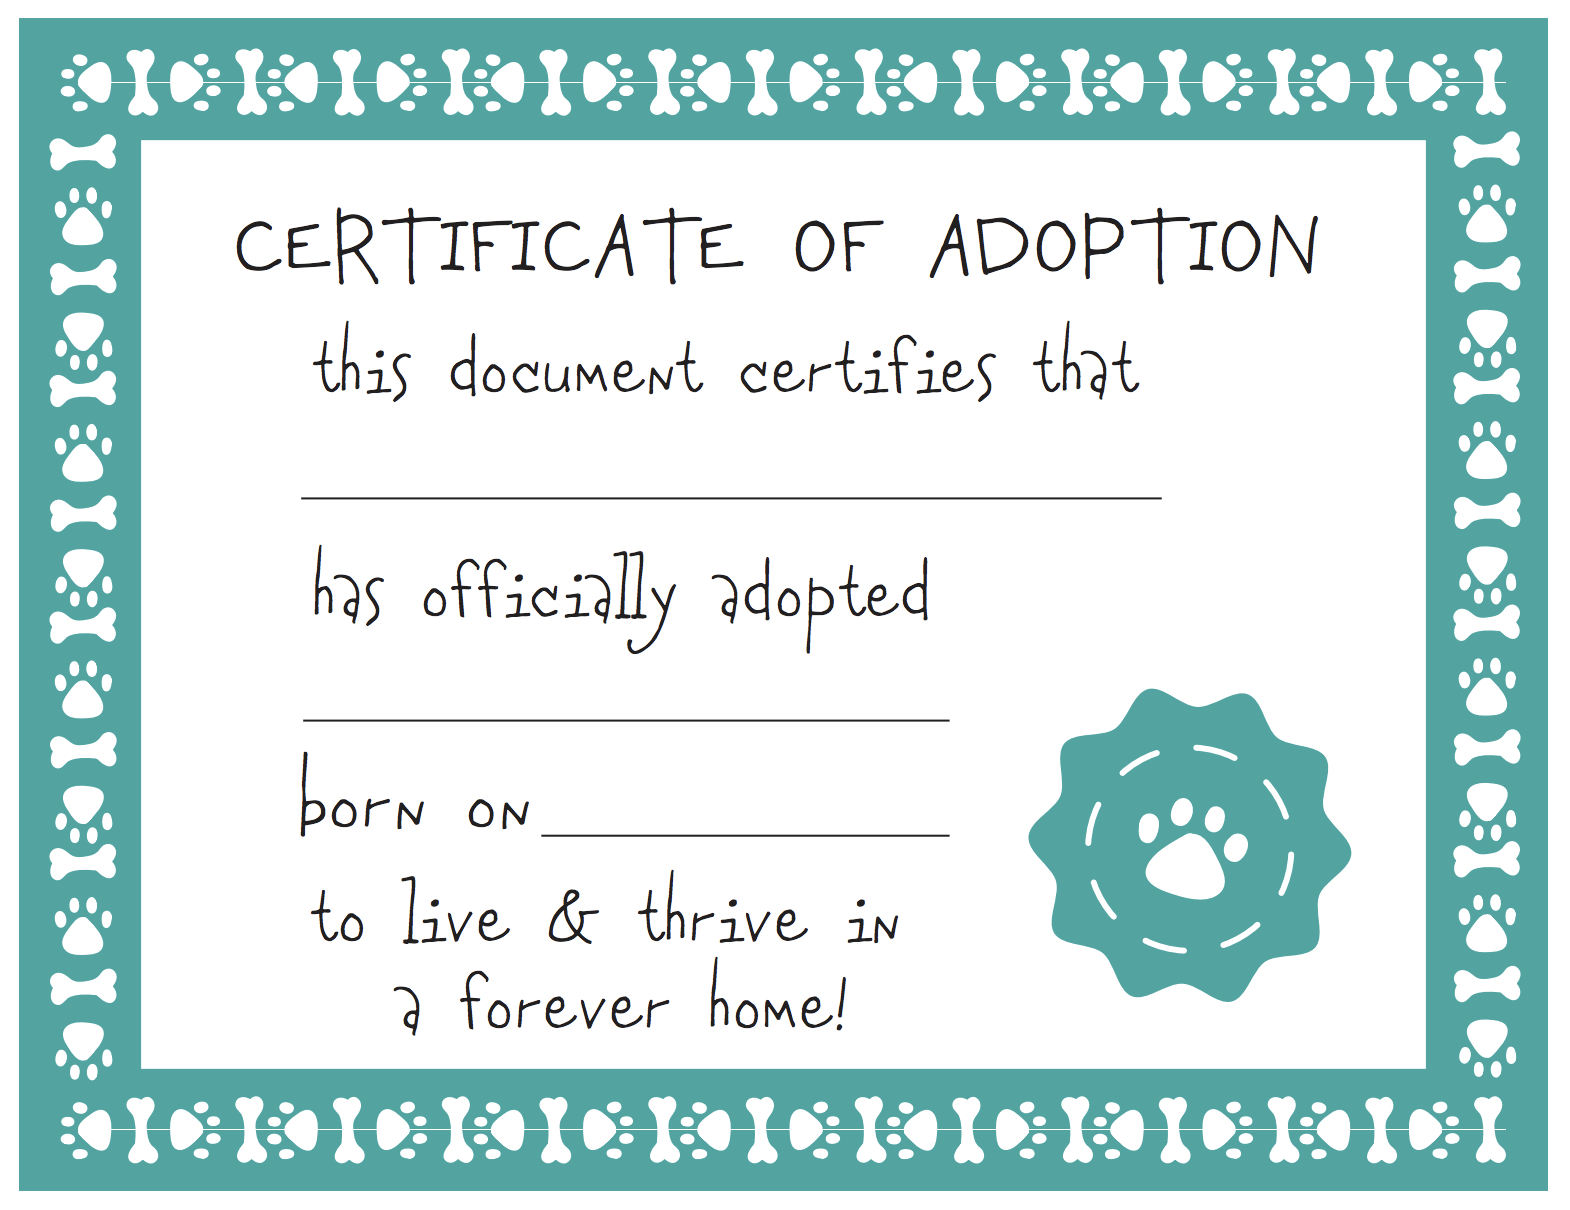 Adoption Certificate Templates And Pet Template With Dog Plus Free - Fake Adoption Certificate Free Printable